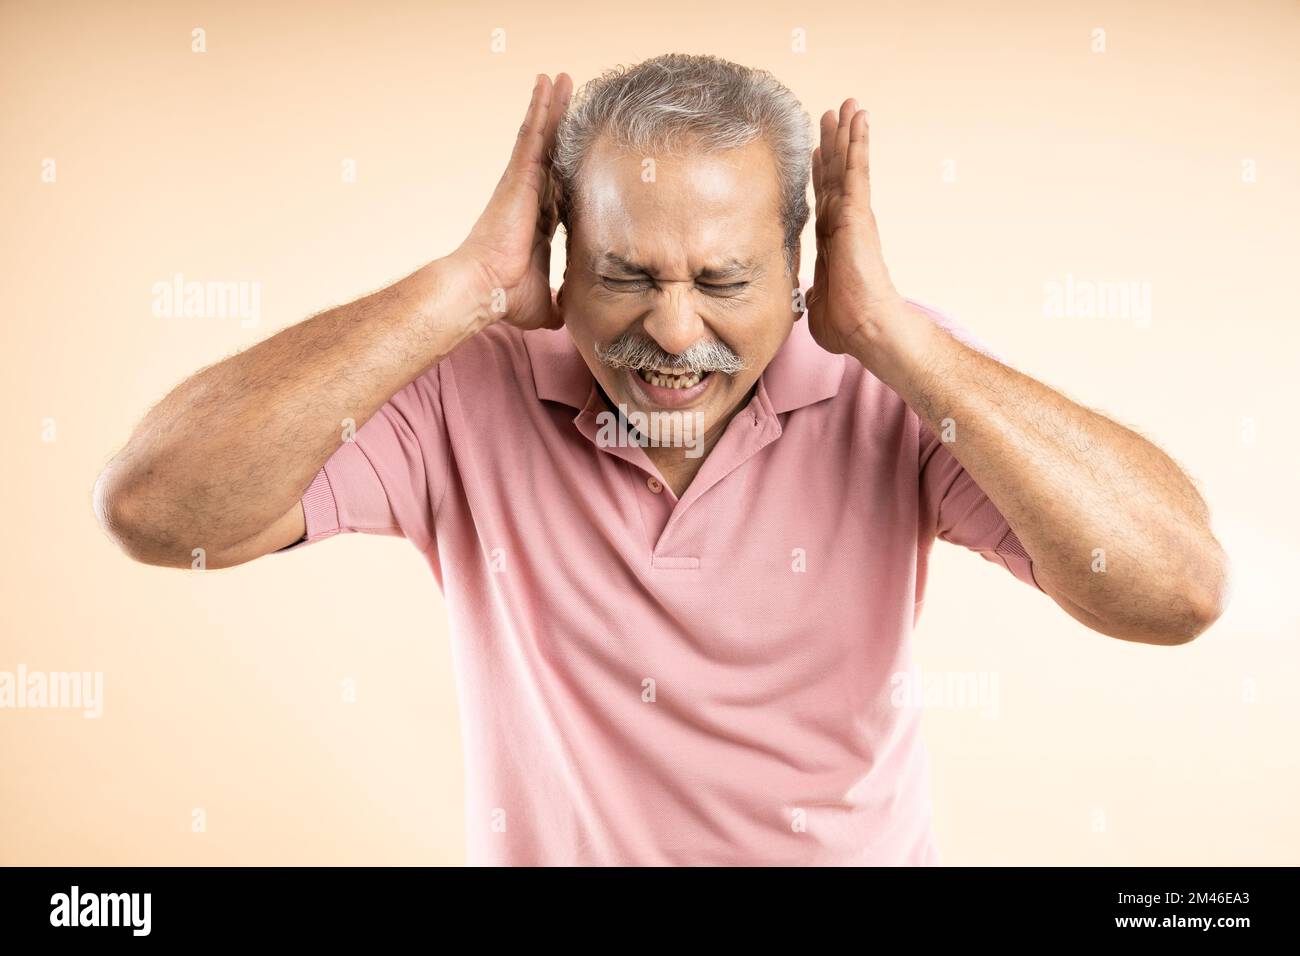 Irritated Indian senior man screaming with shut ears, disturbed by loud noise, standing over beige background. Stock Photo